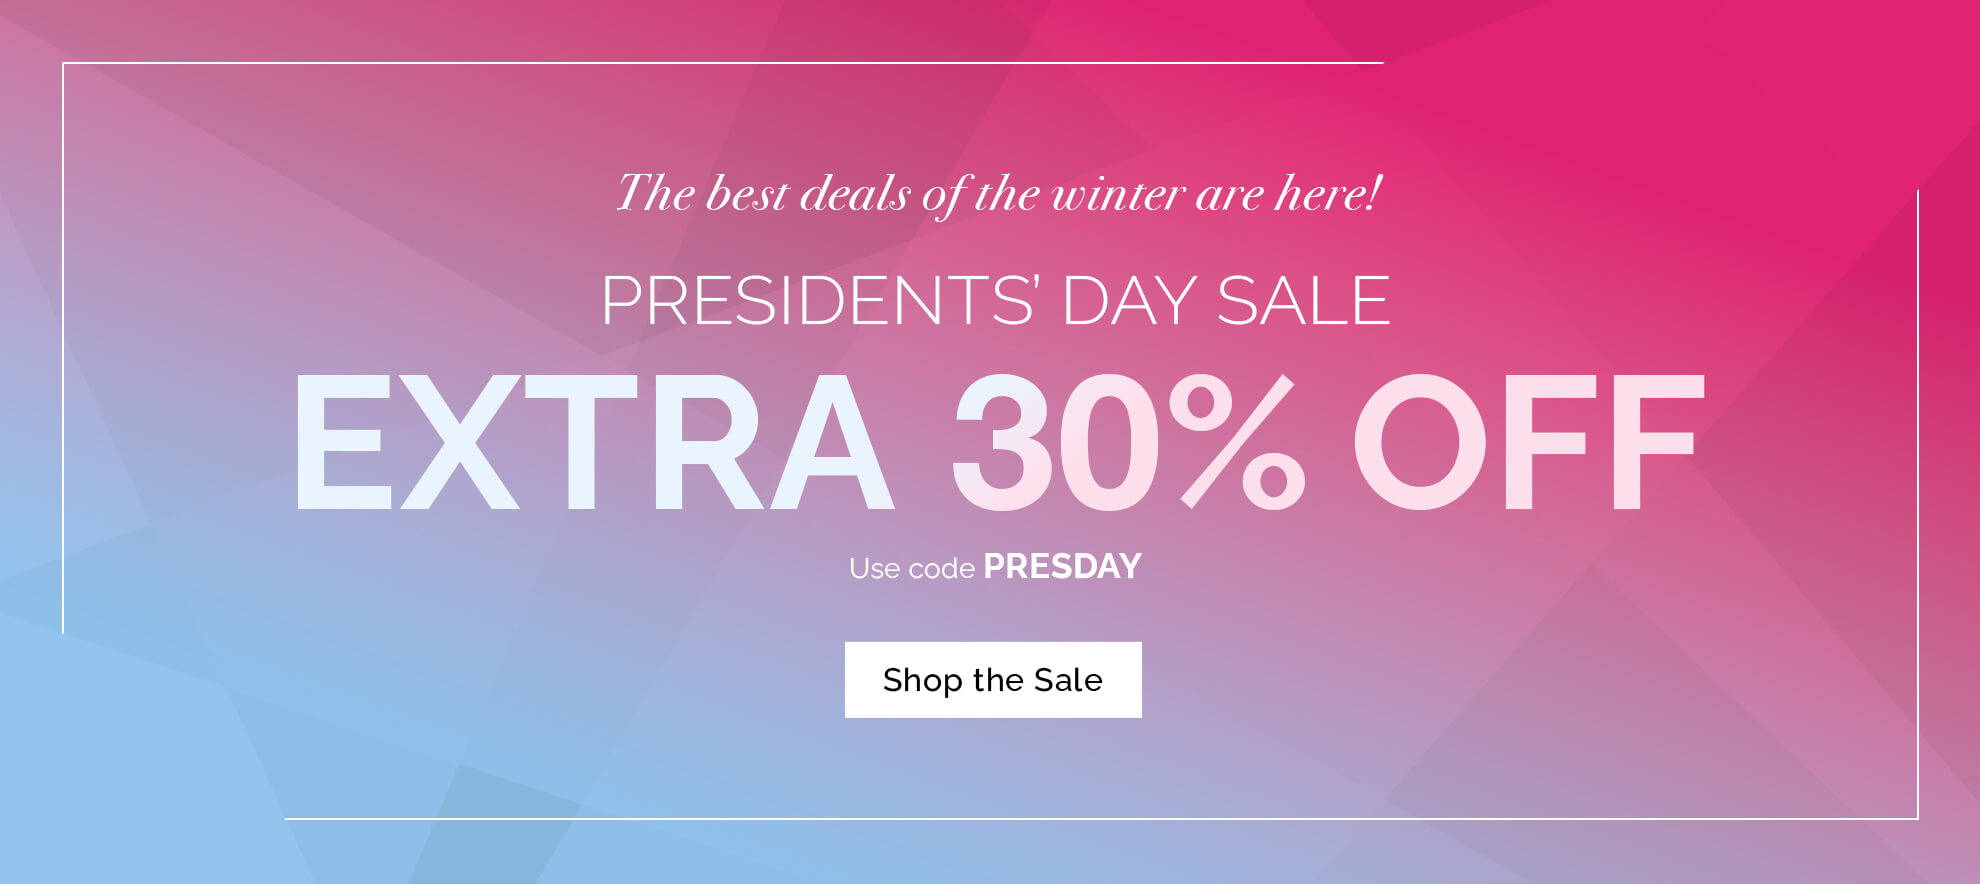 Shop the Presidents Day Sale